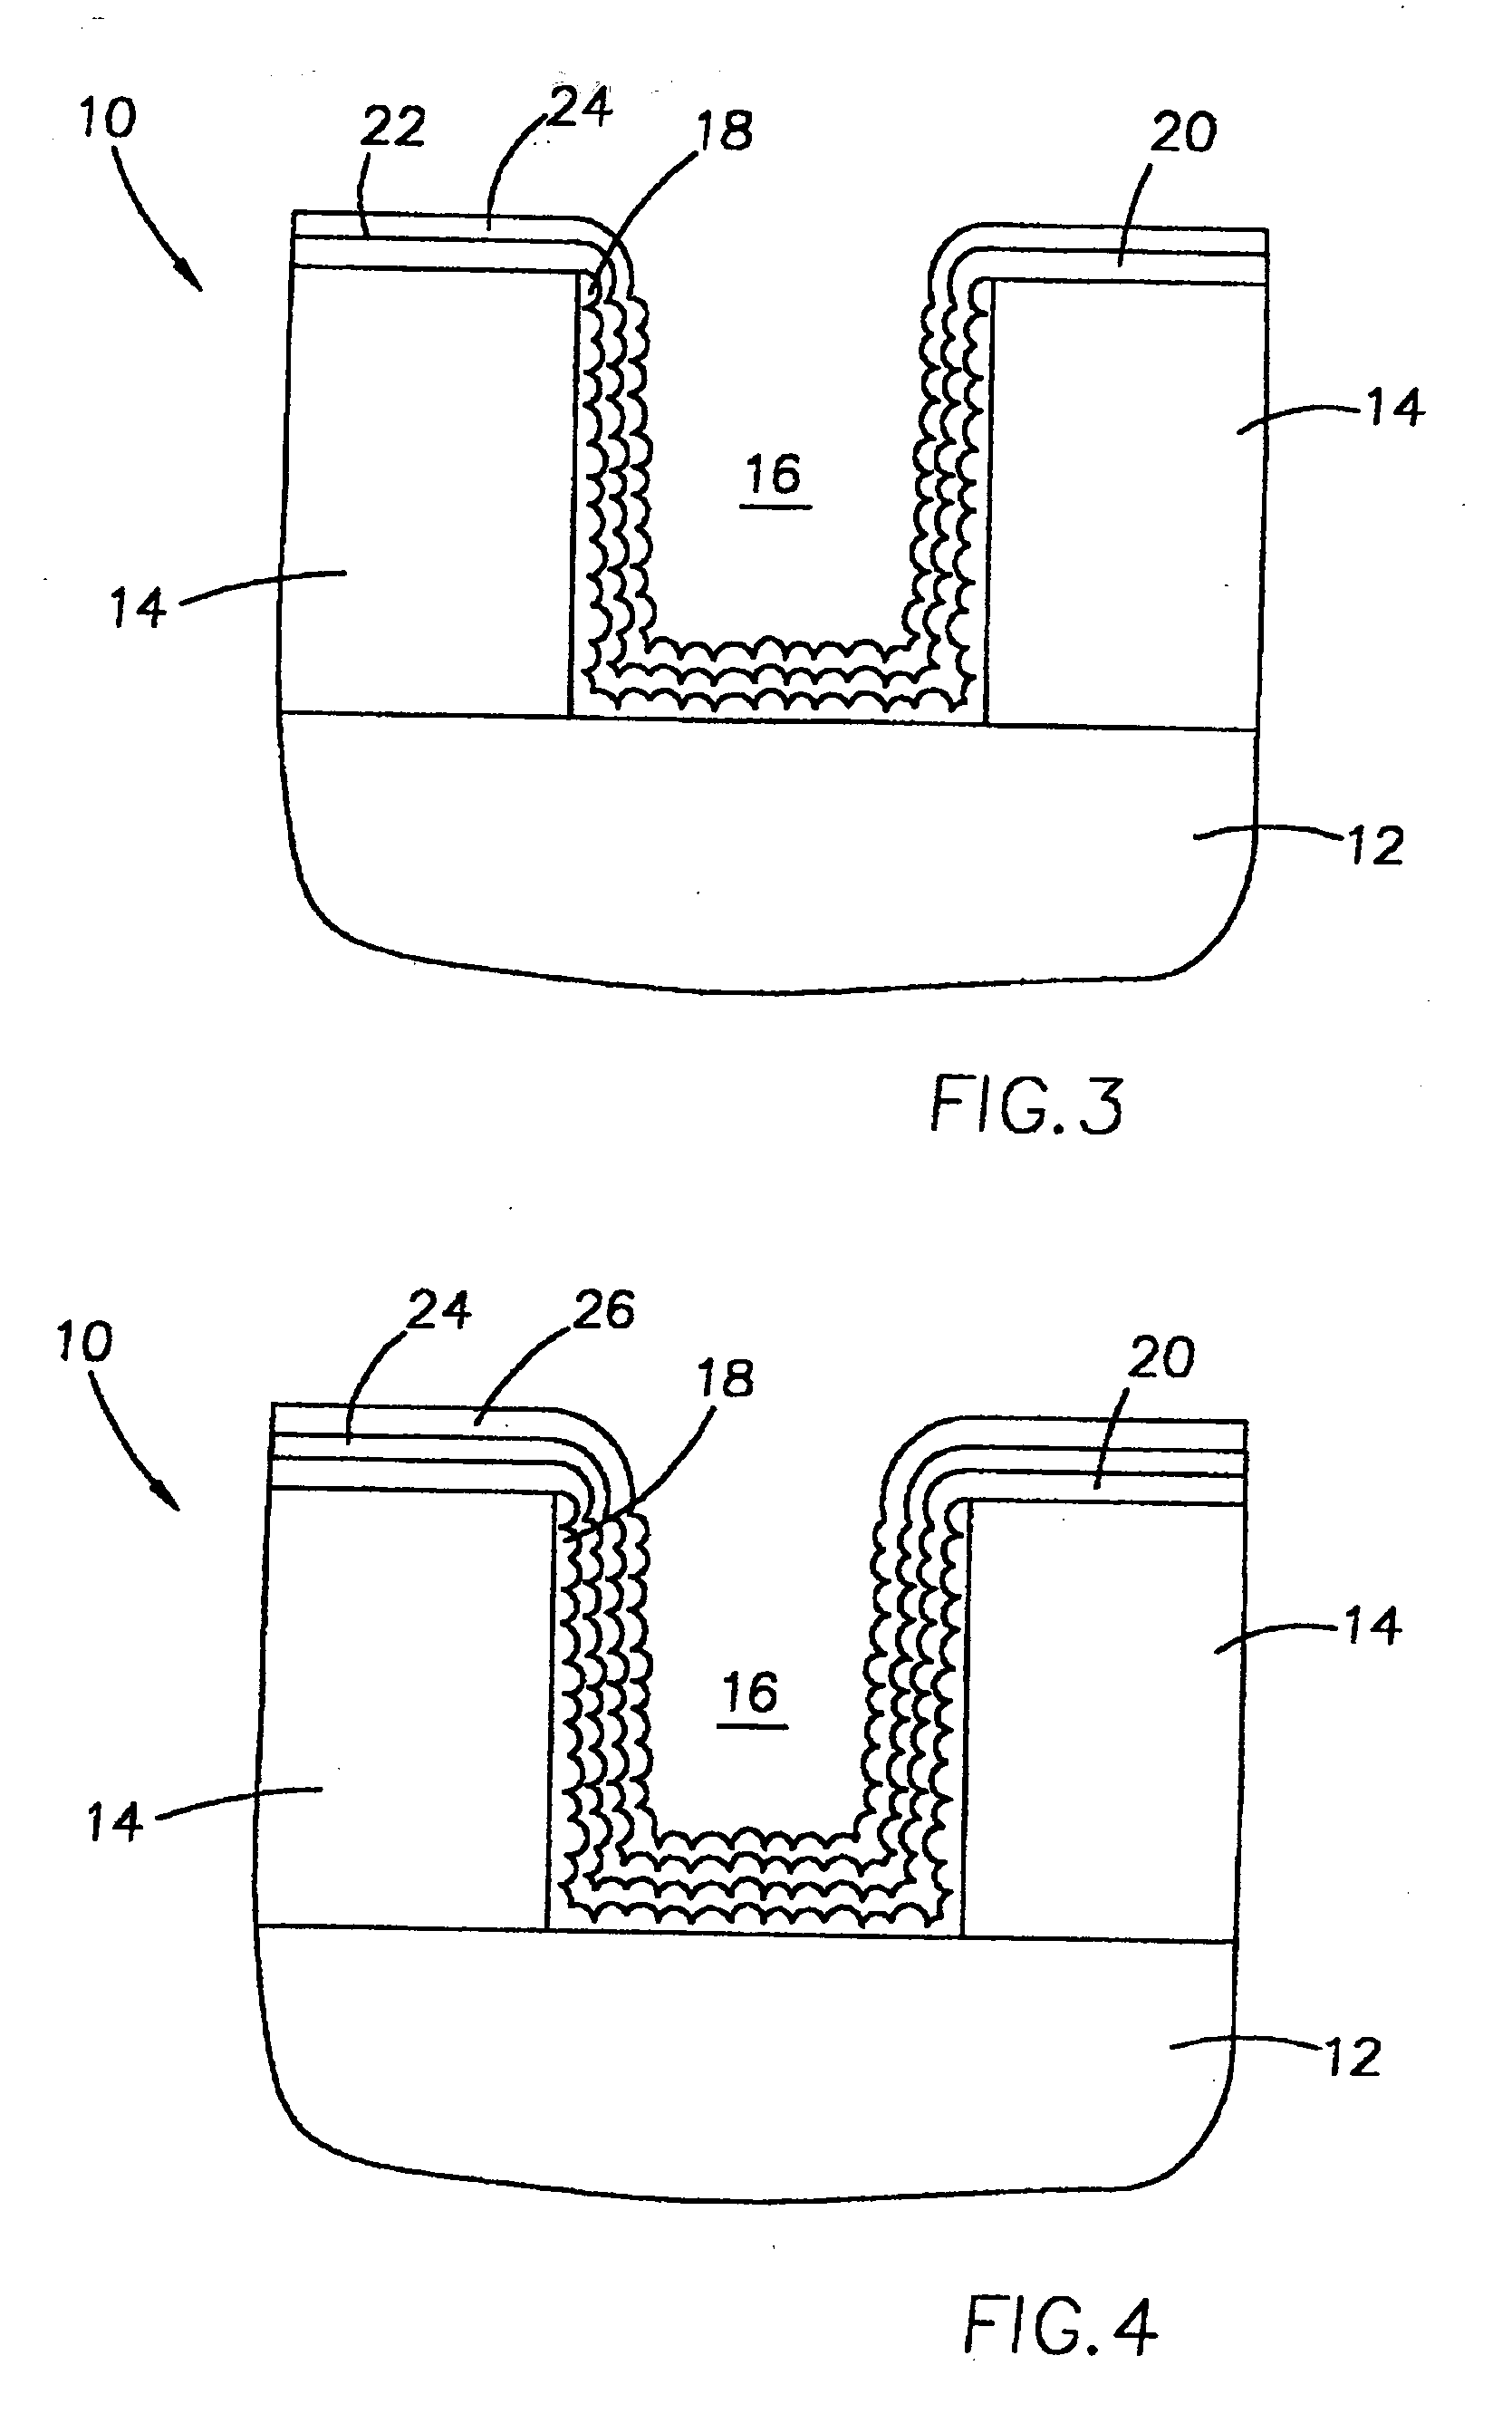 Method of improved high K dielectric - polysilicon interface for CMOS devices